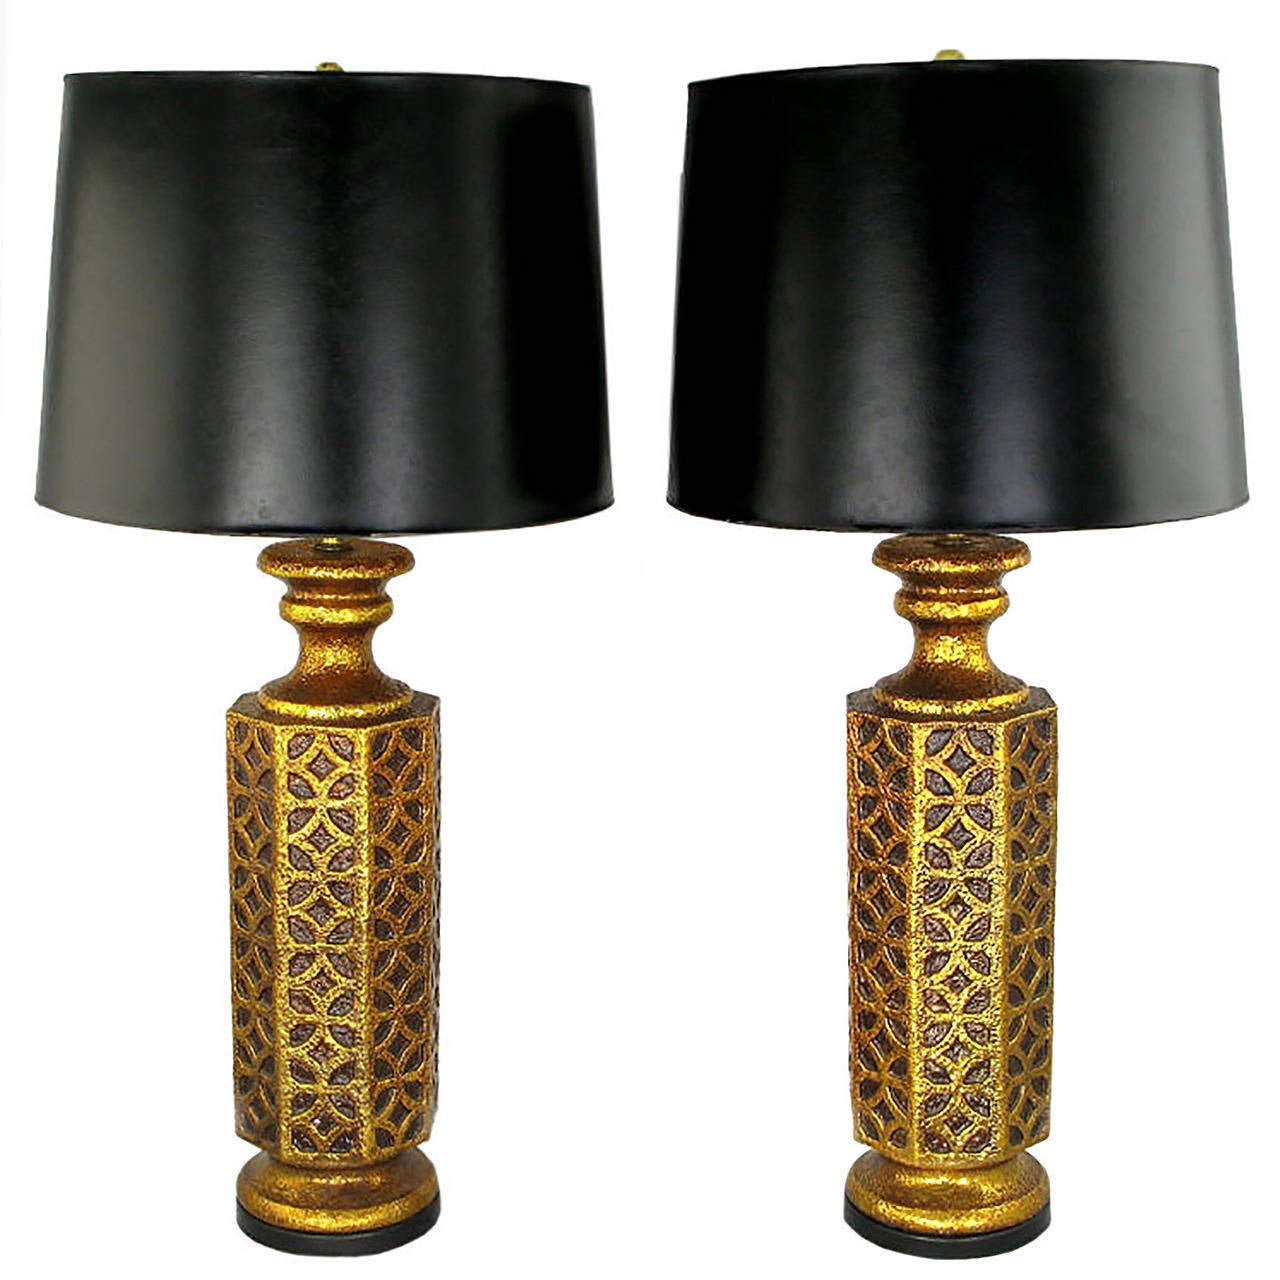 Pair of Moroccan-Style Gilt Arabesques Table Lamps For Sale at 1stdibs